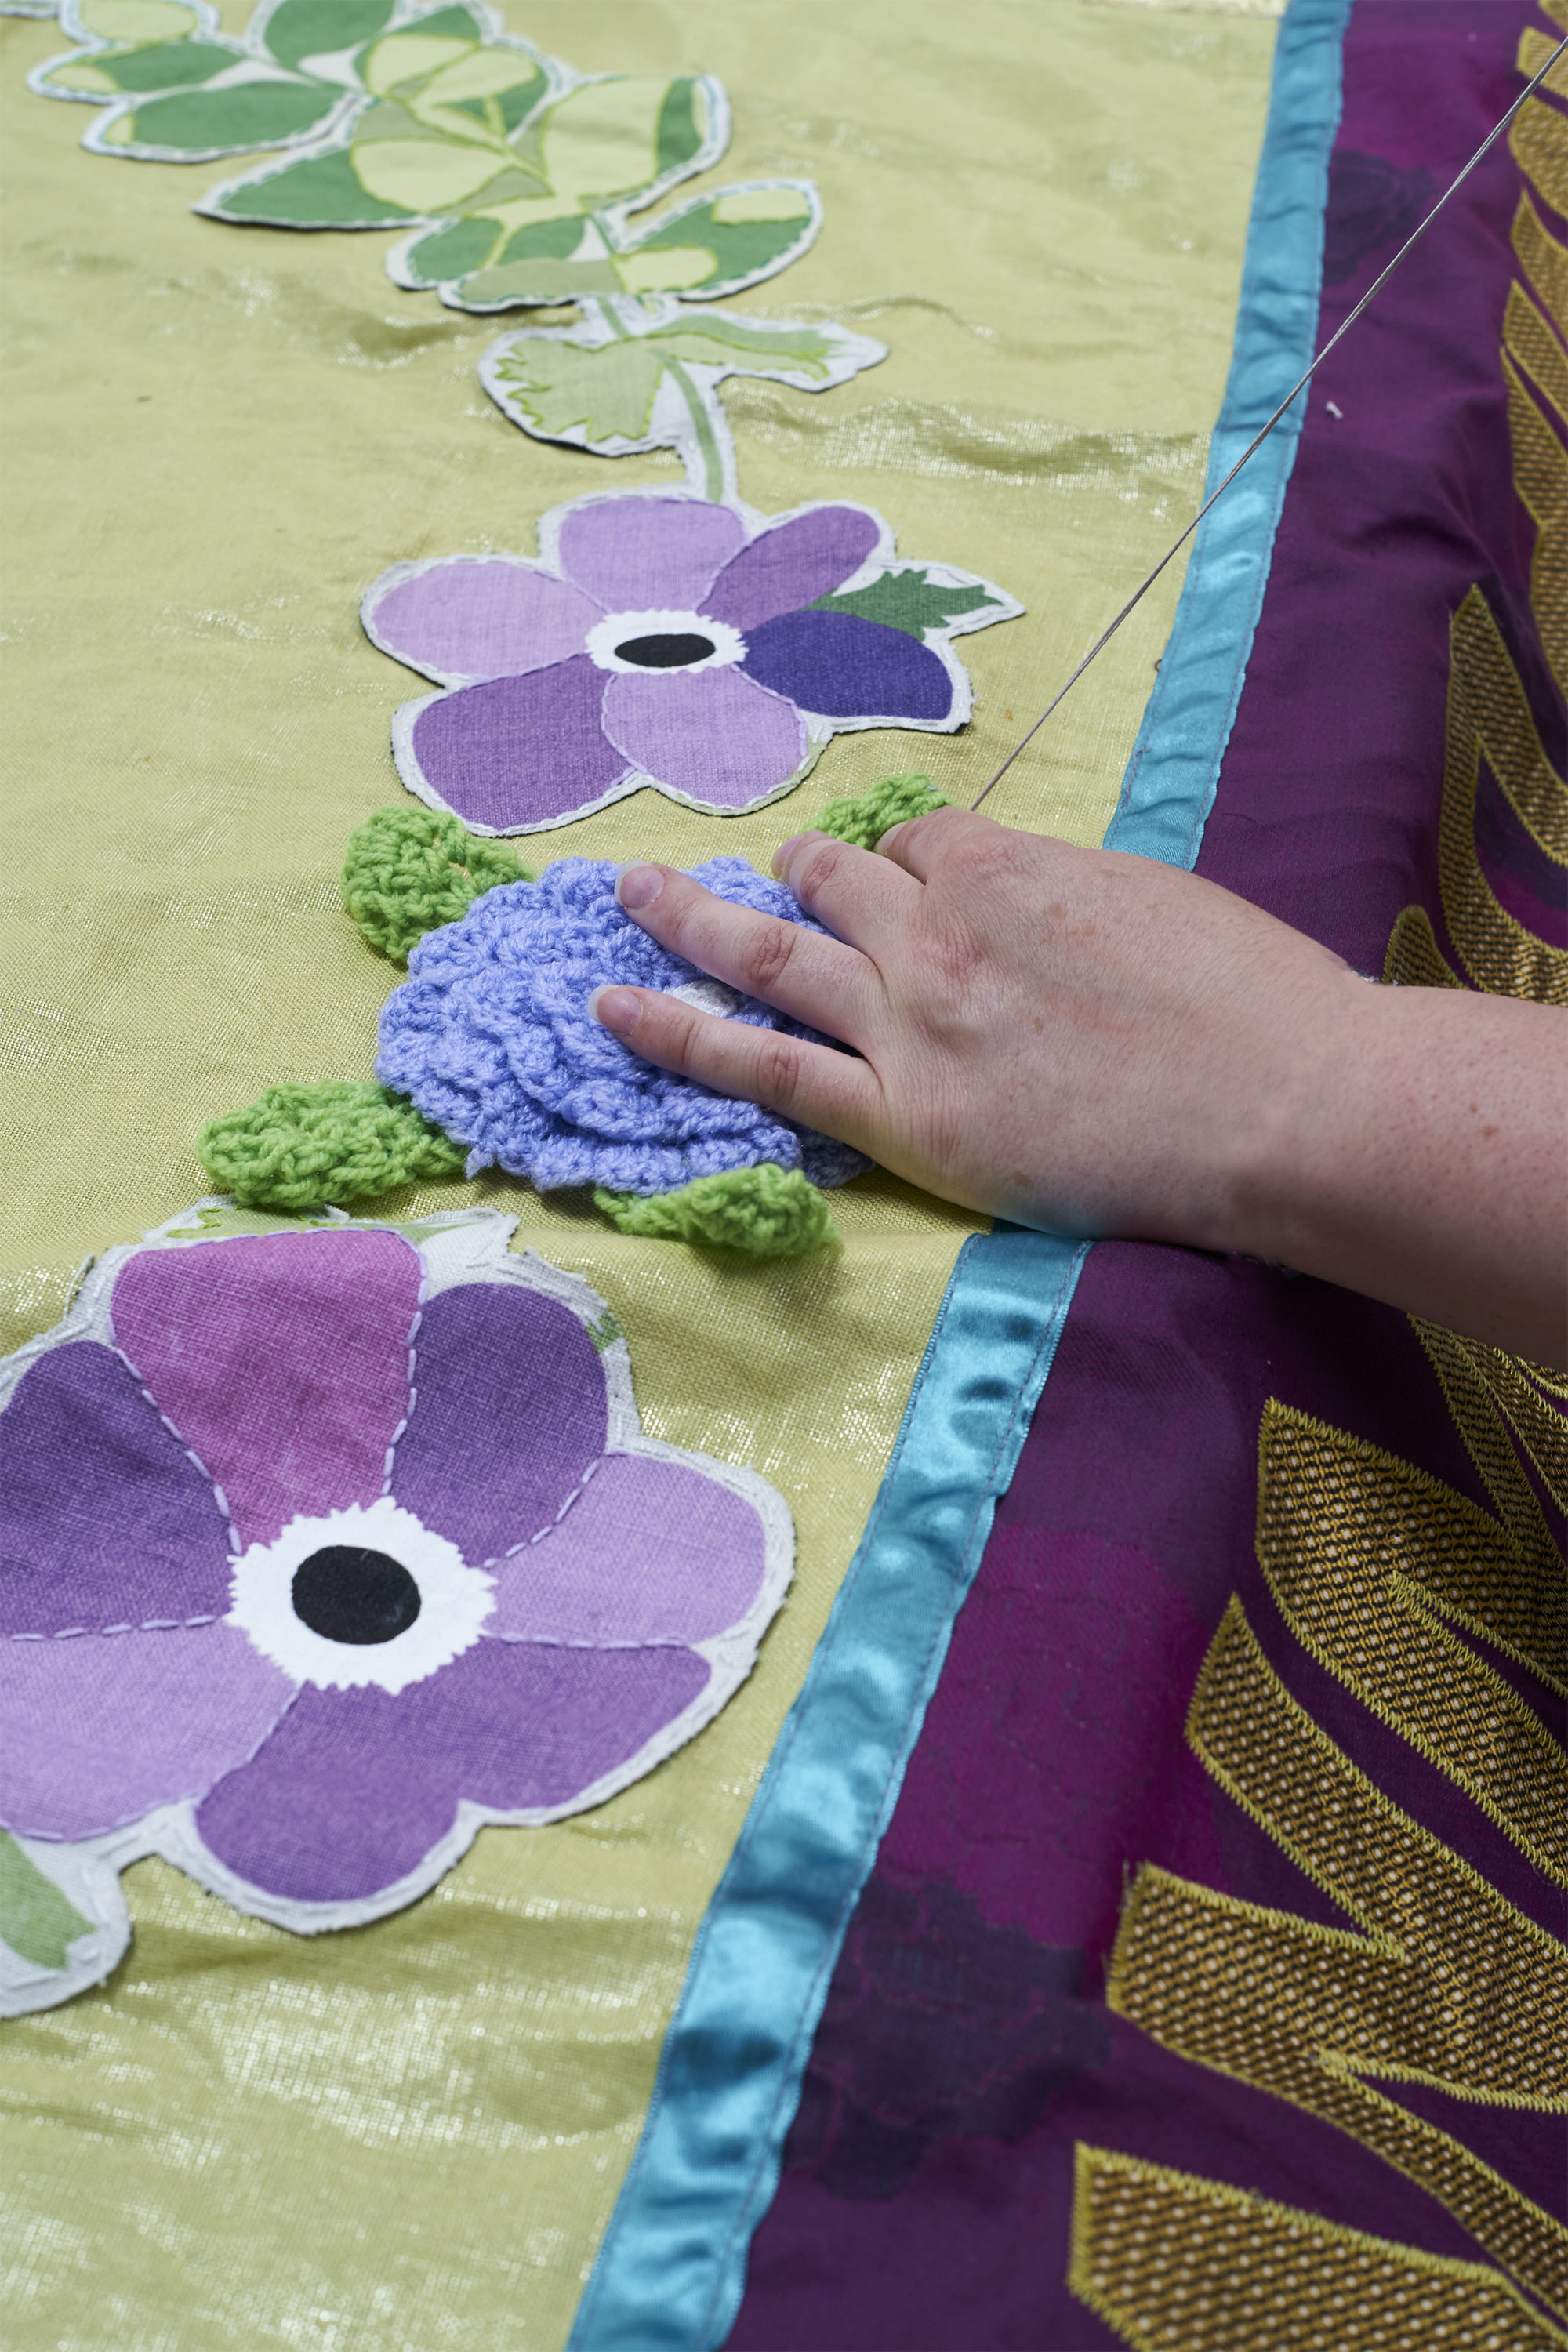 A pair of hands sews a crocheted poppy on a yellow piece of cloth.